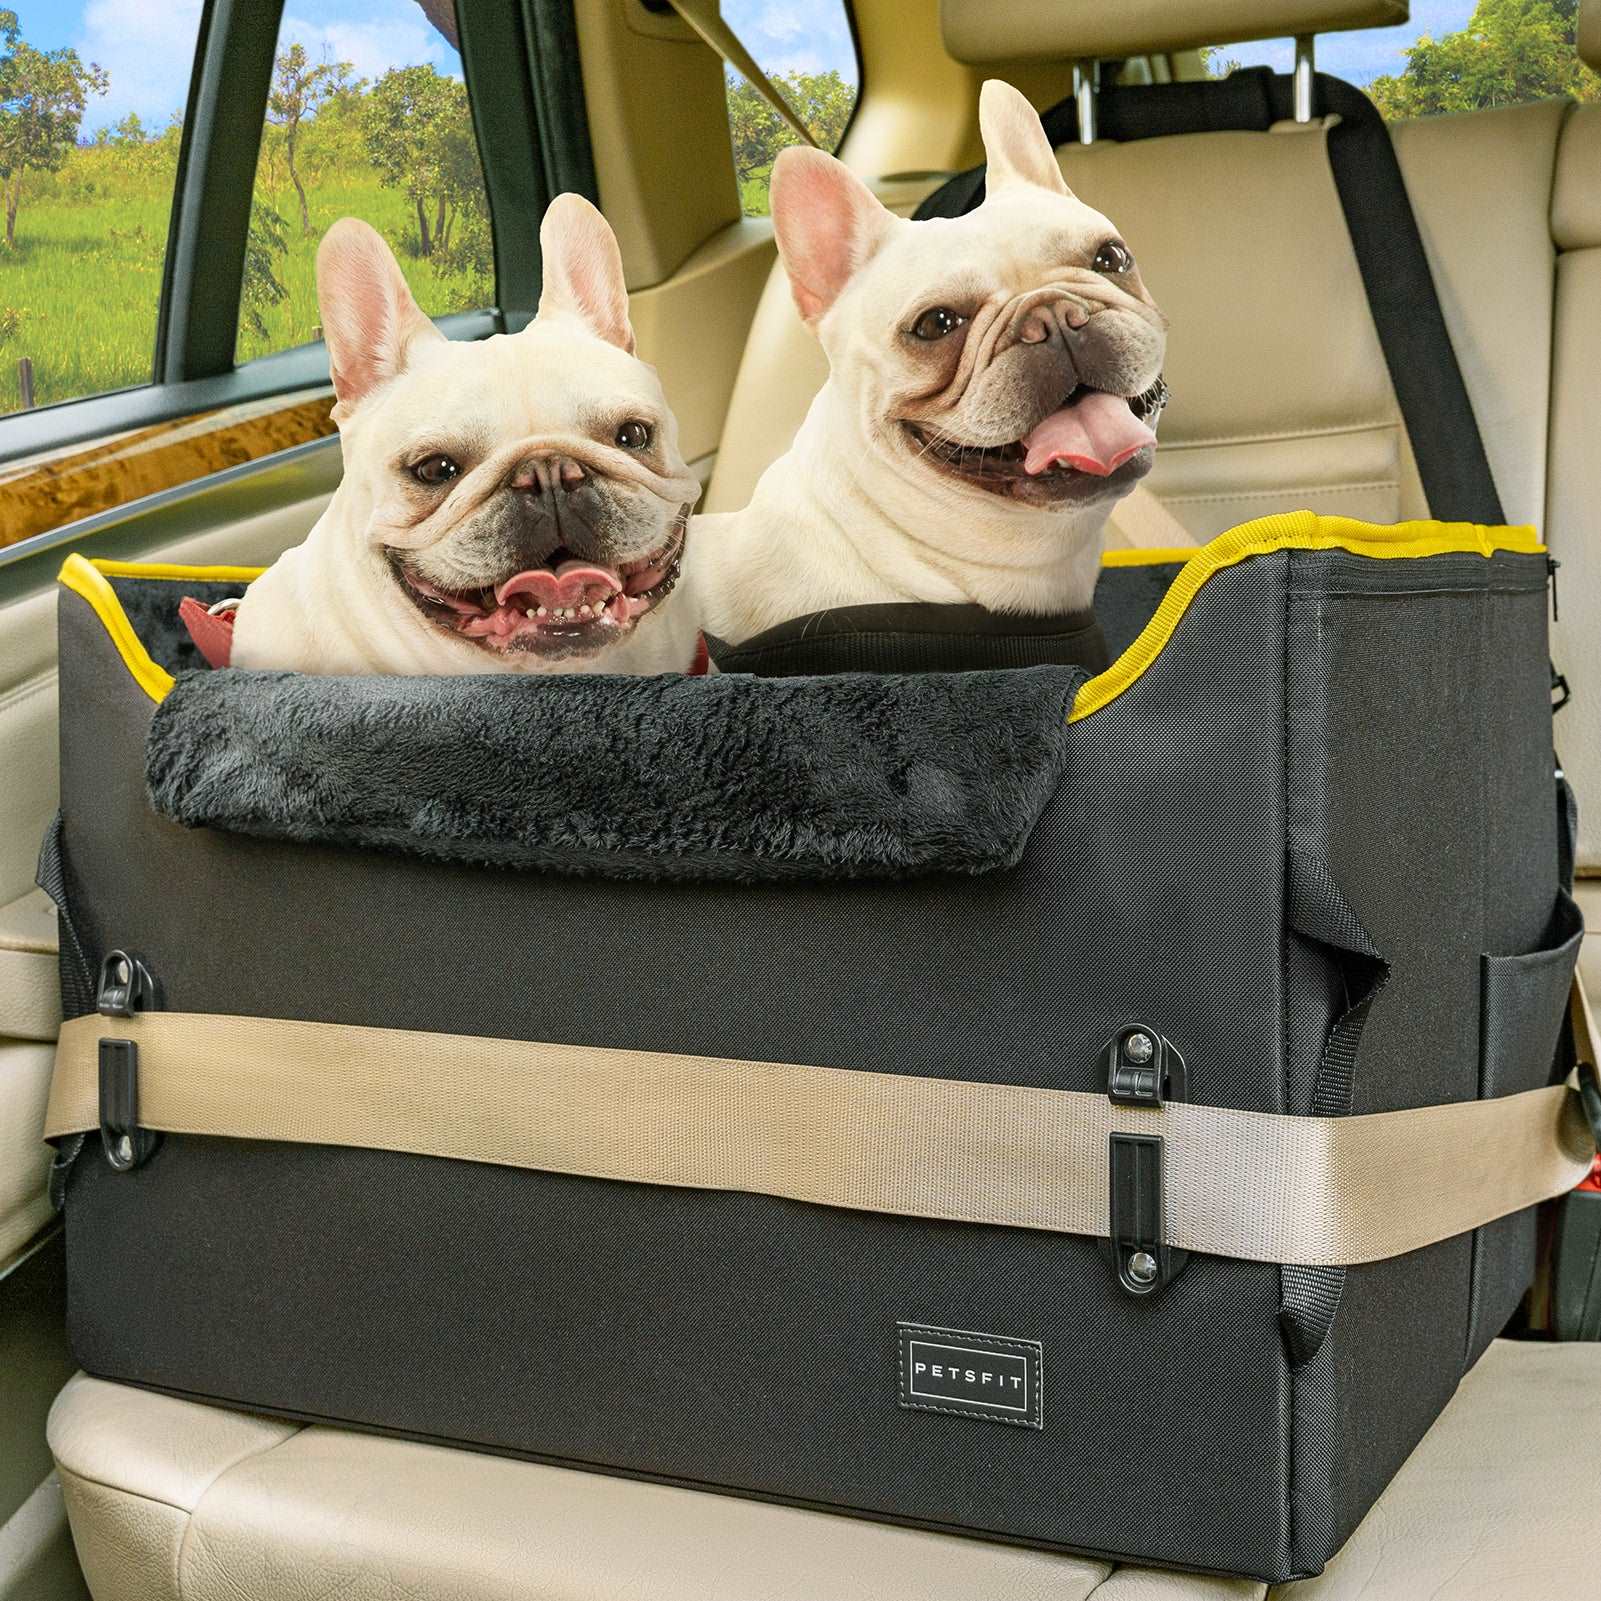 petsfit-dog-booster-car-seat-dog-car-seat-for-medium-dogs-with-2-clip-on-safety-leashes-01